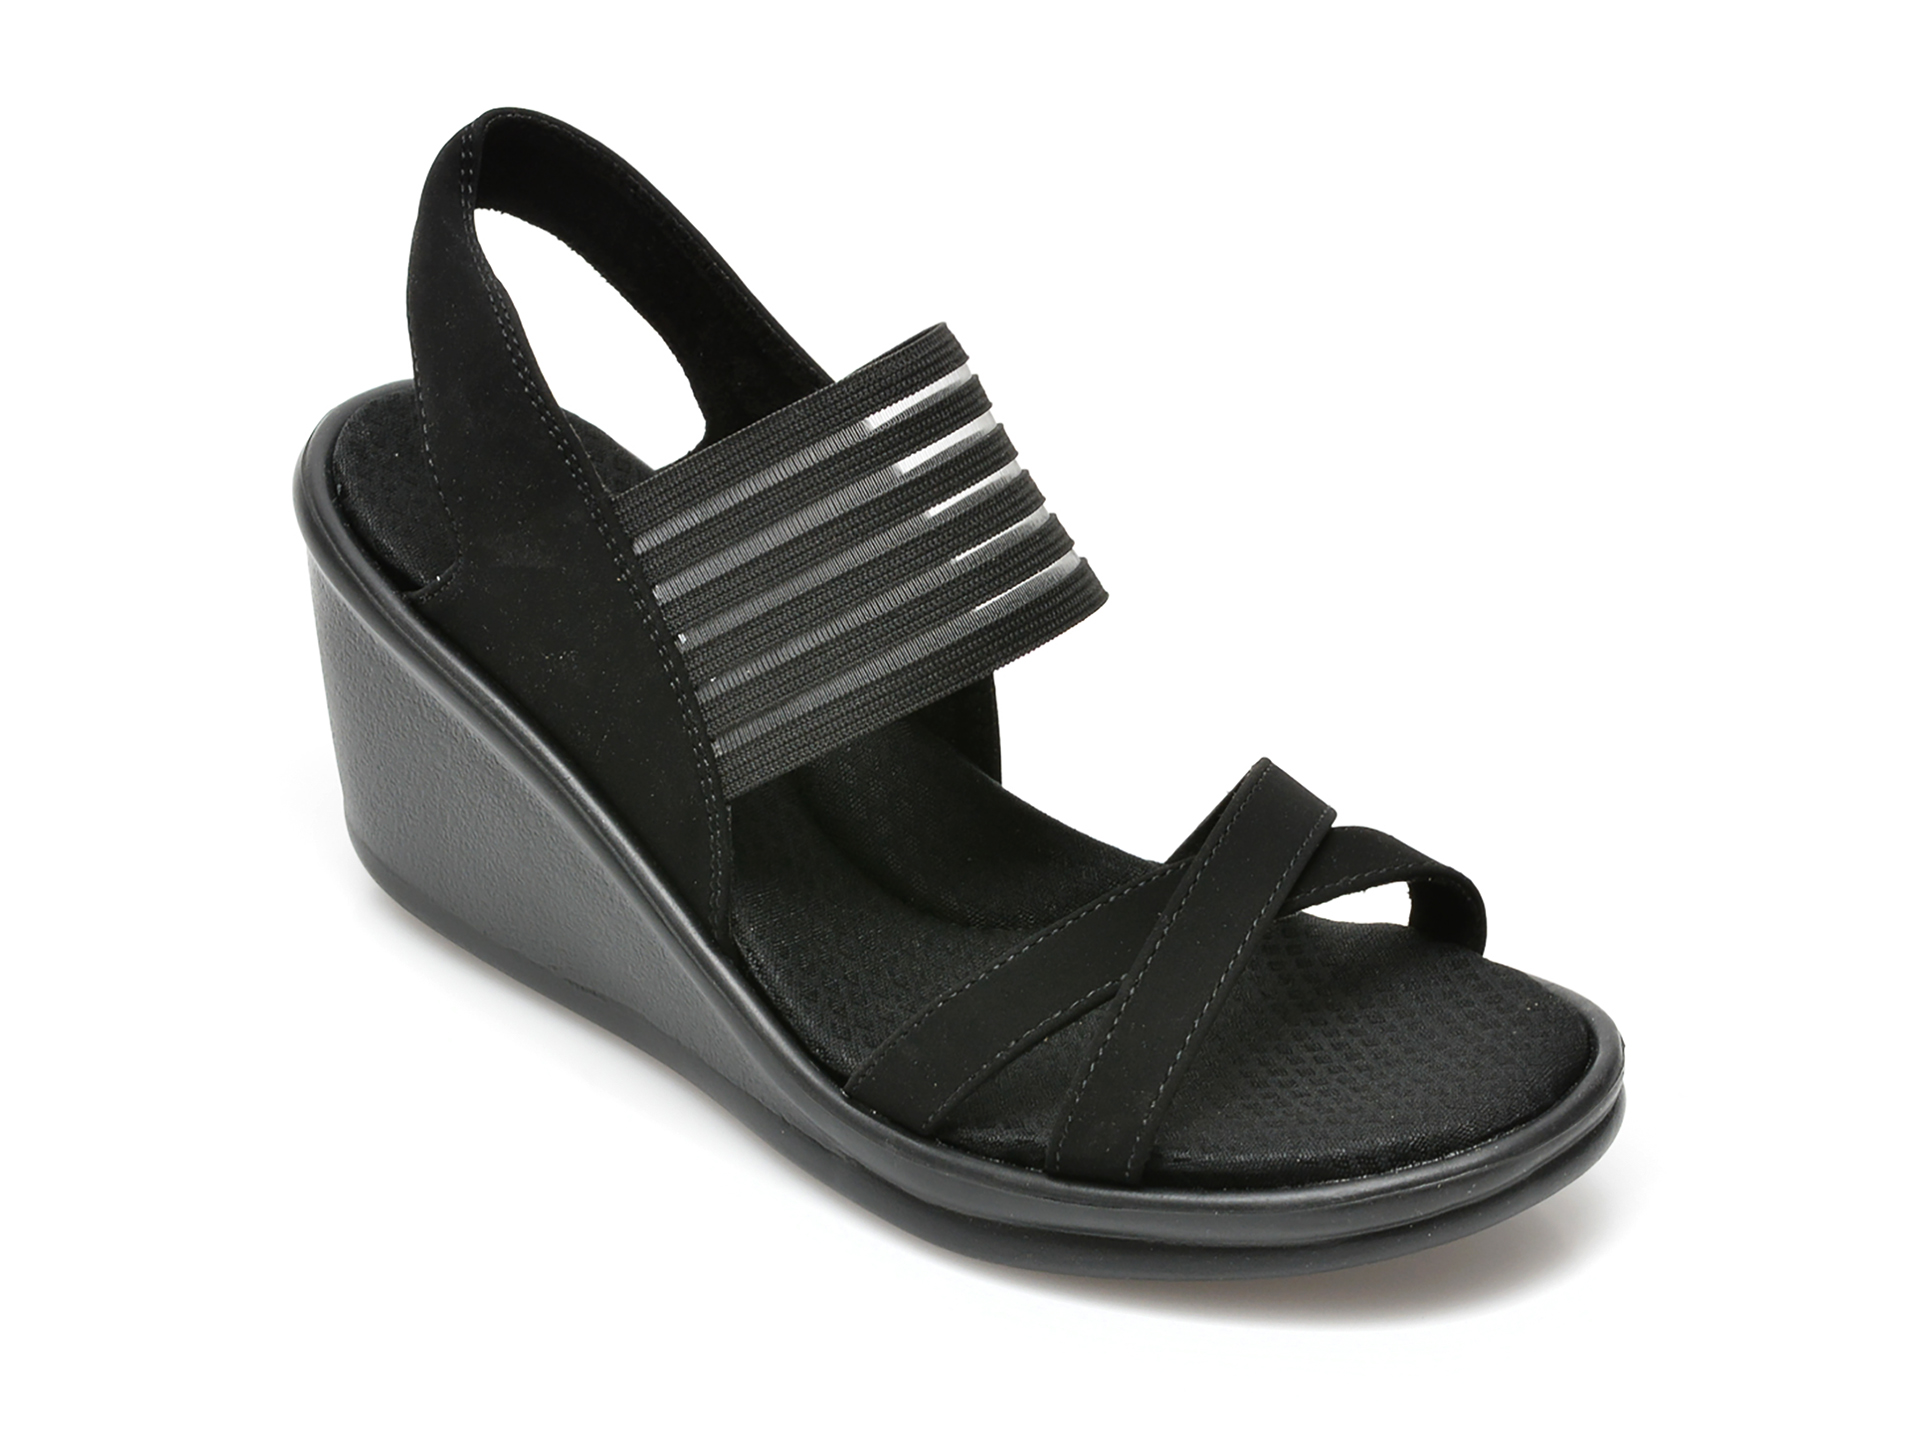 Sandale SKECHERS negre, RUMBLERS, din material textil si piele ecologica otter.ro